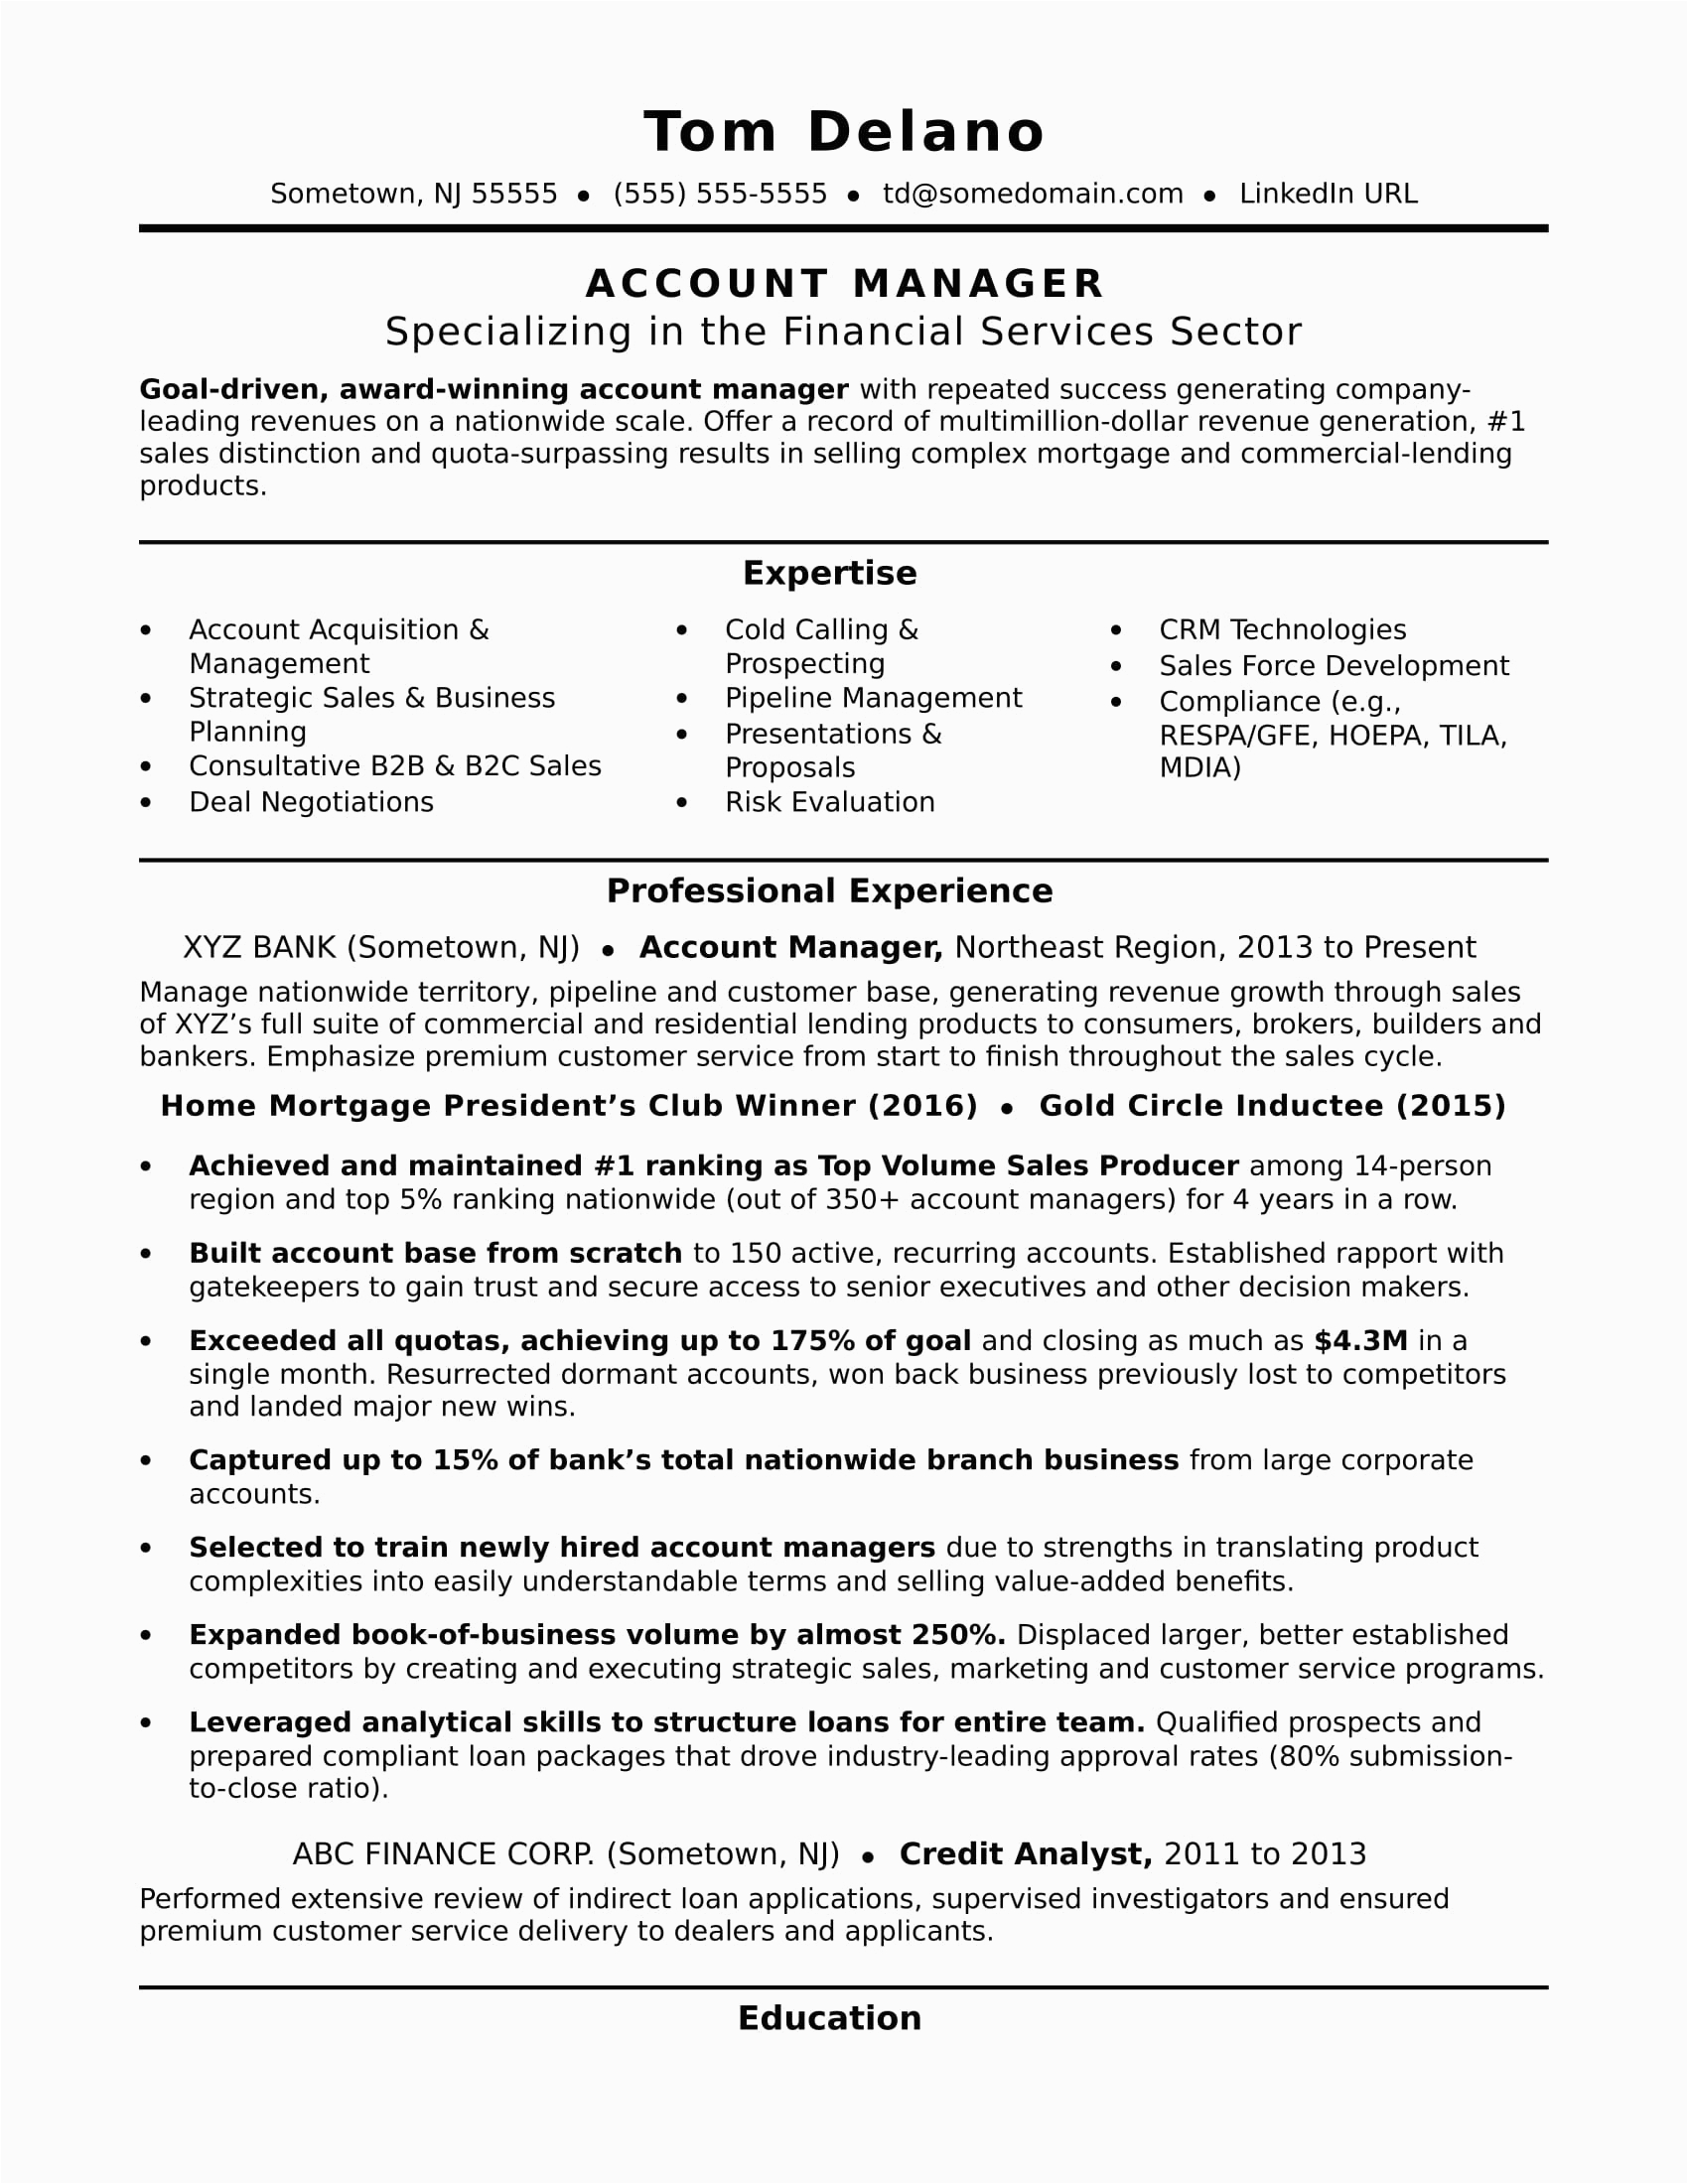 Sample Resume for Account Executive Position Account Manager Resume Sample